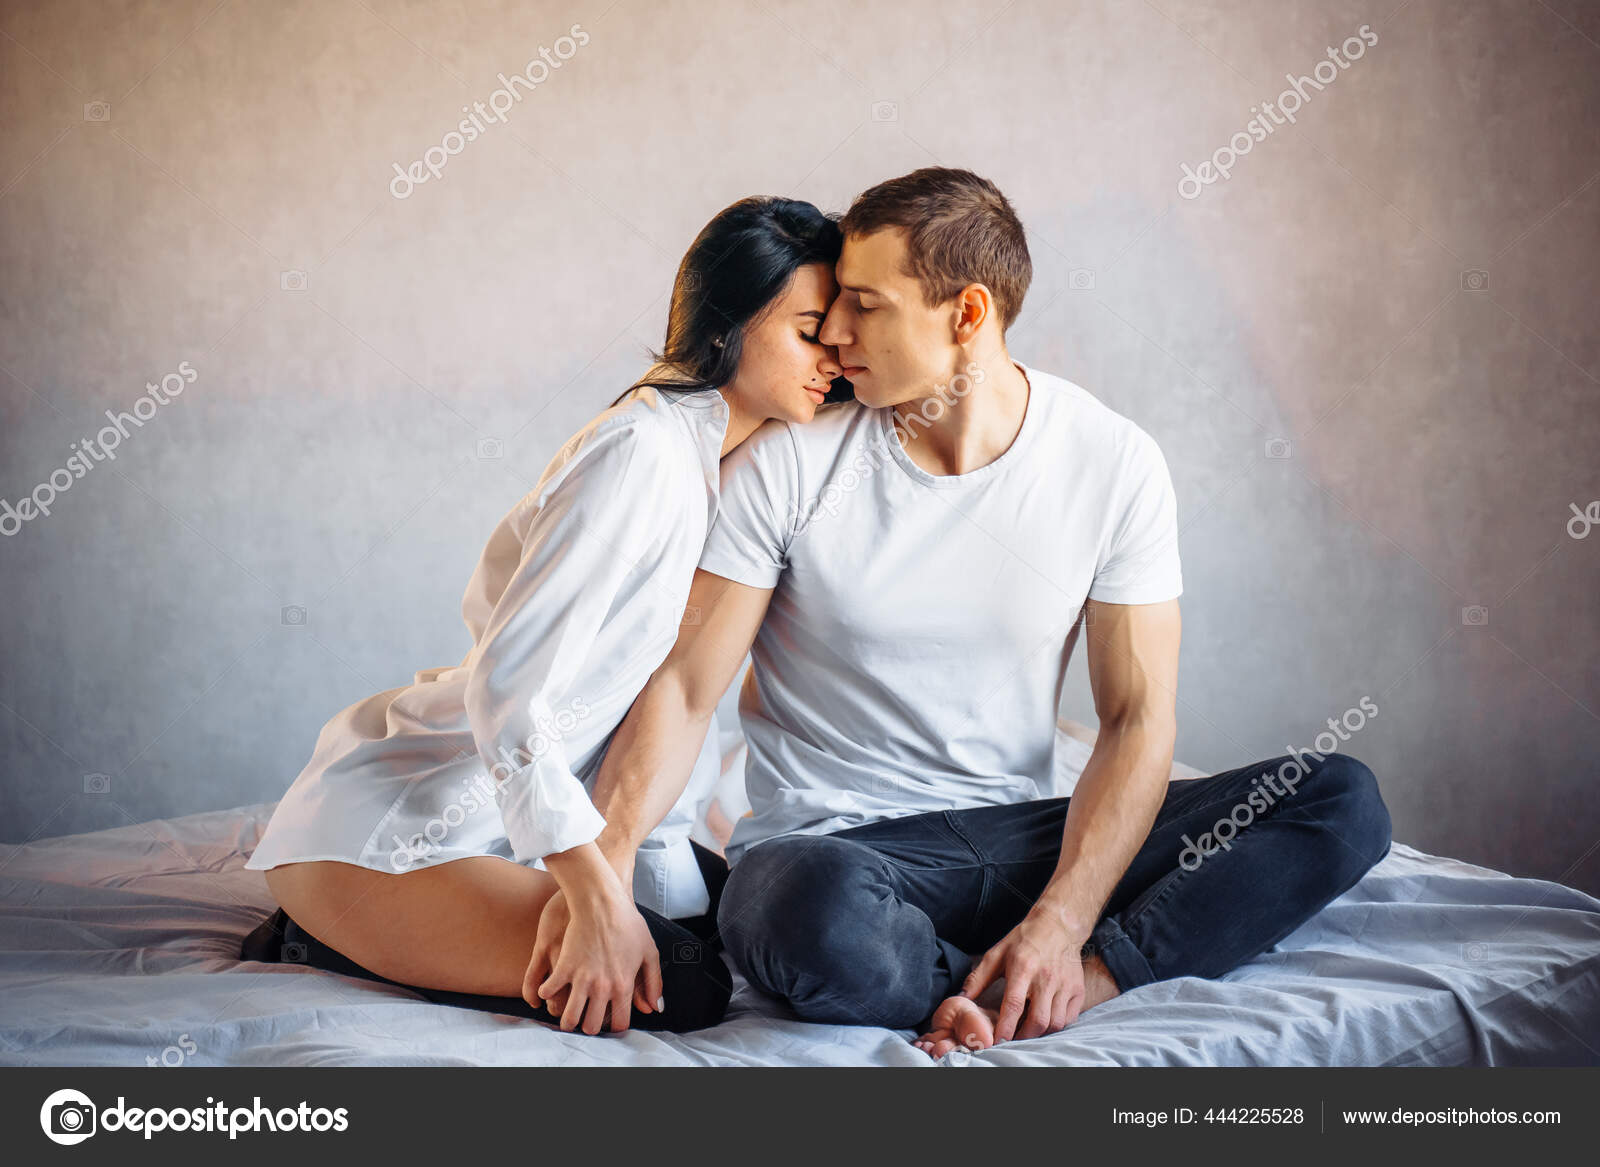 Passionate Woman Hugging Man Tenderly Kissing Him Romantically Young Gentle Stock Photo by ©dariaagaf 444225528